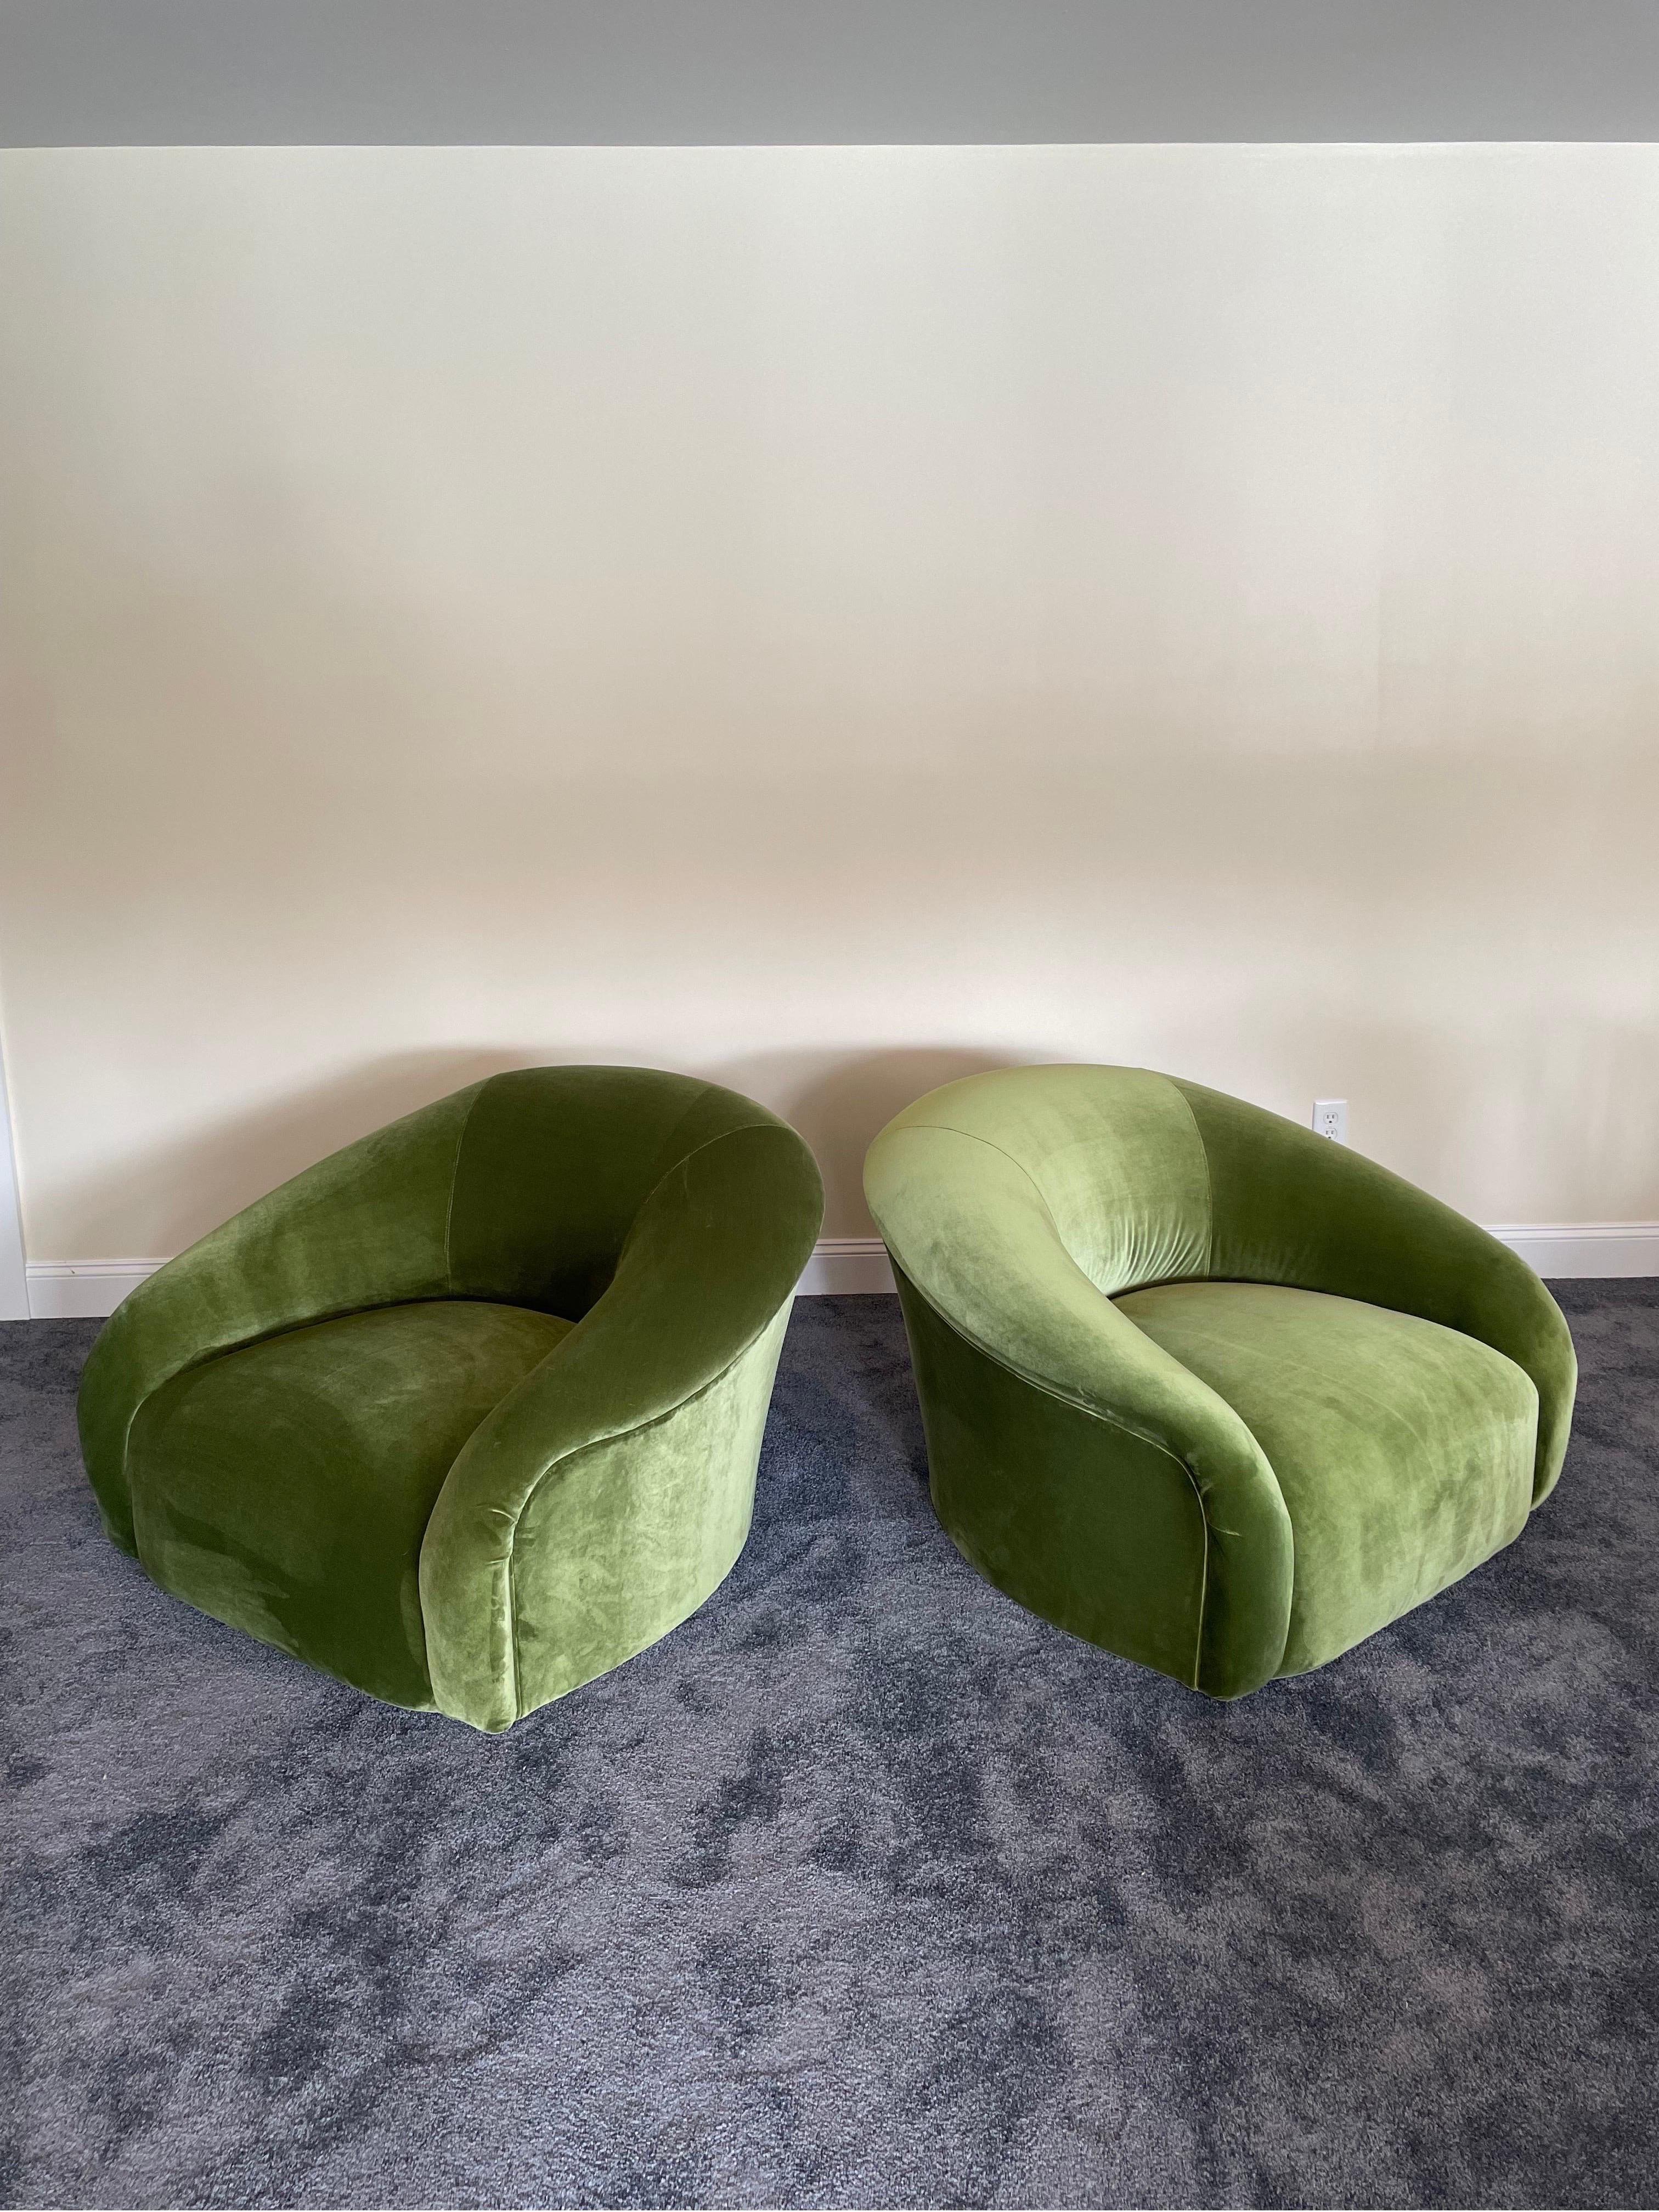 American Vintage Oversized Tub Chairs by Sally Sirkin Lewis for J Robert Scott- a Pair